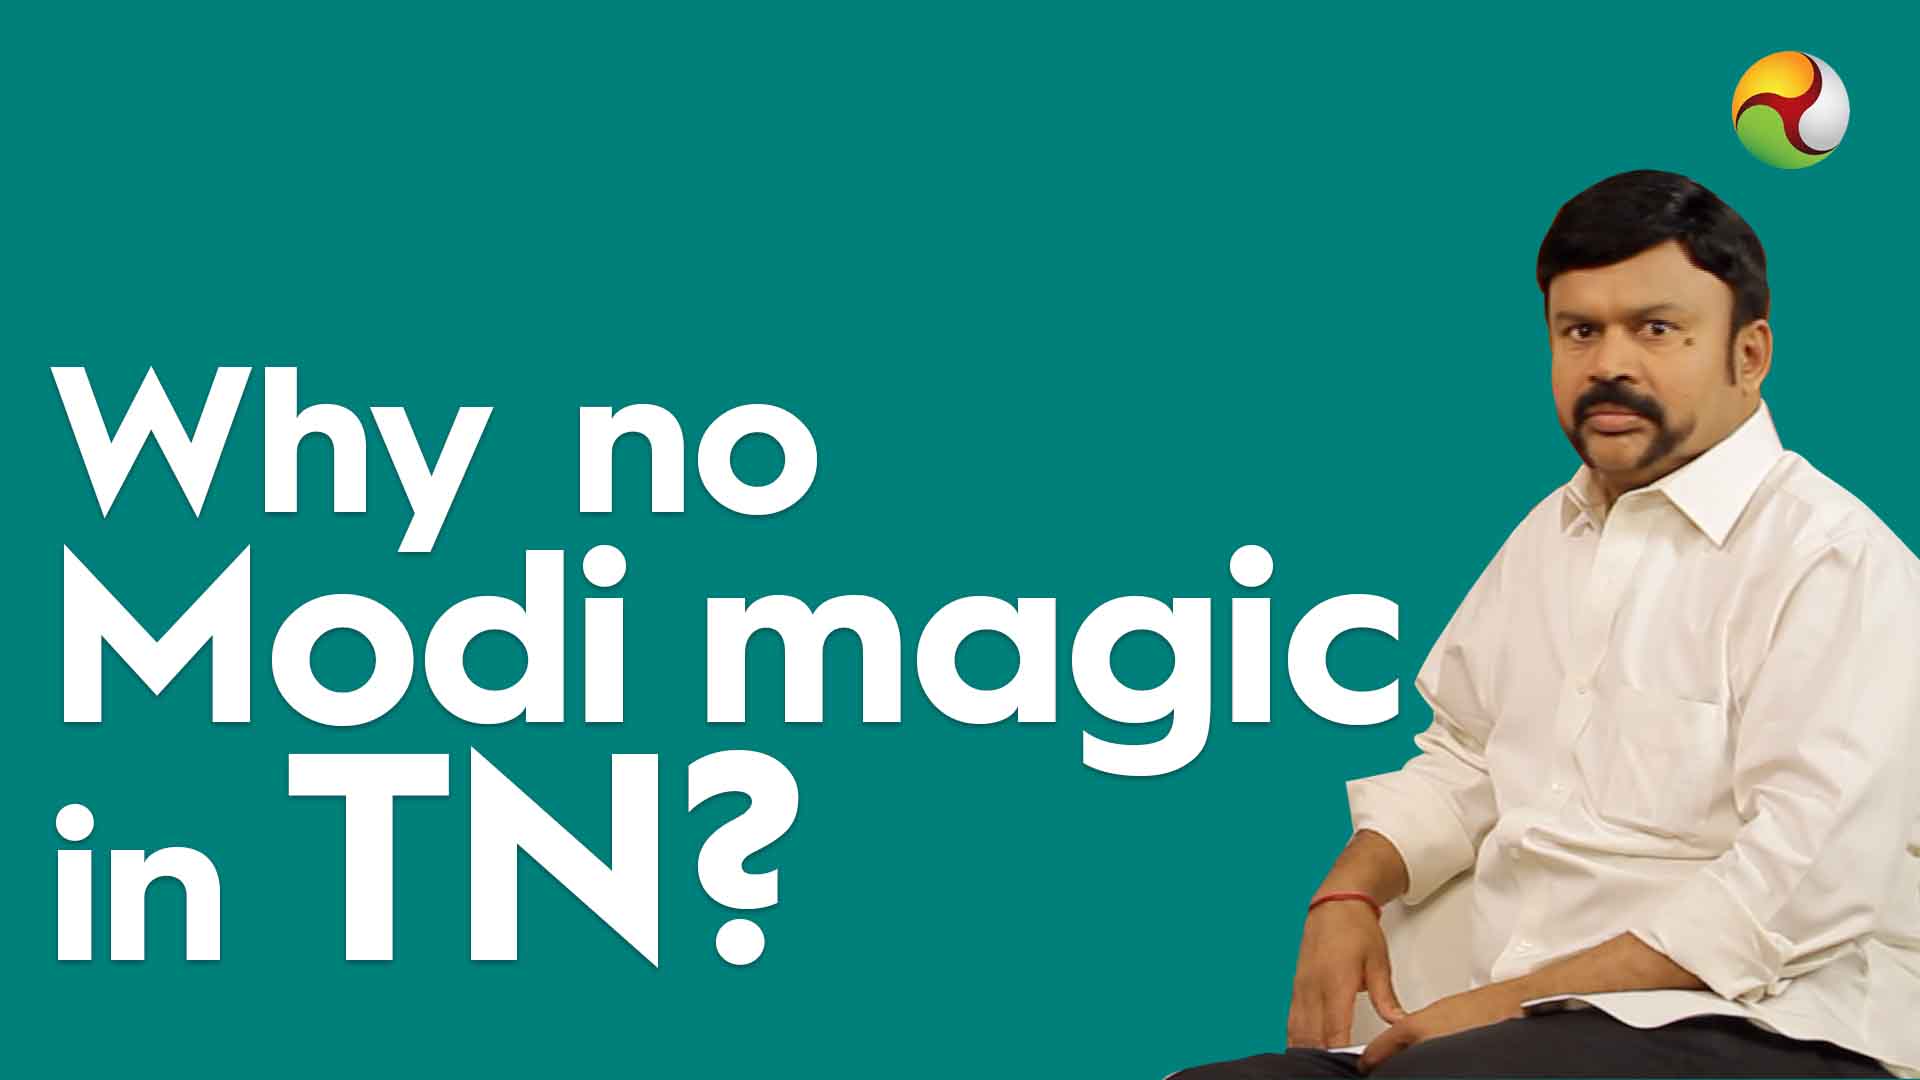 Why Modi magic is not happening in TN?